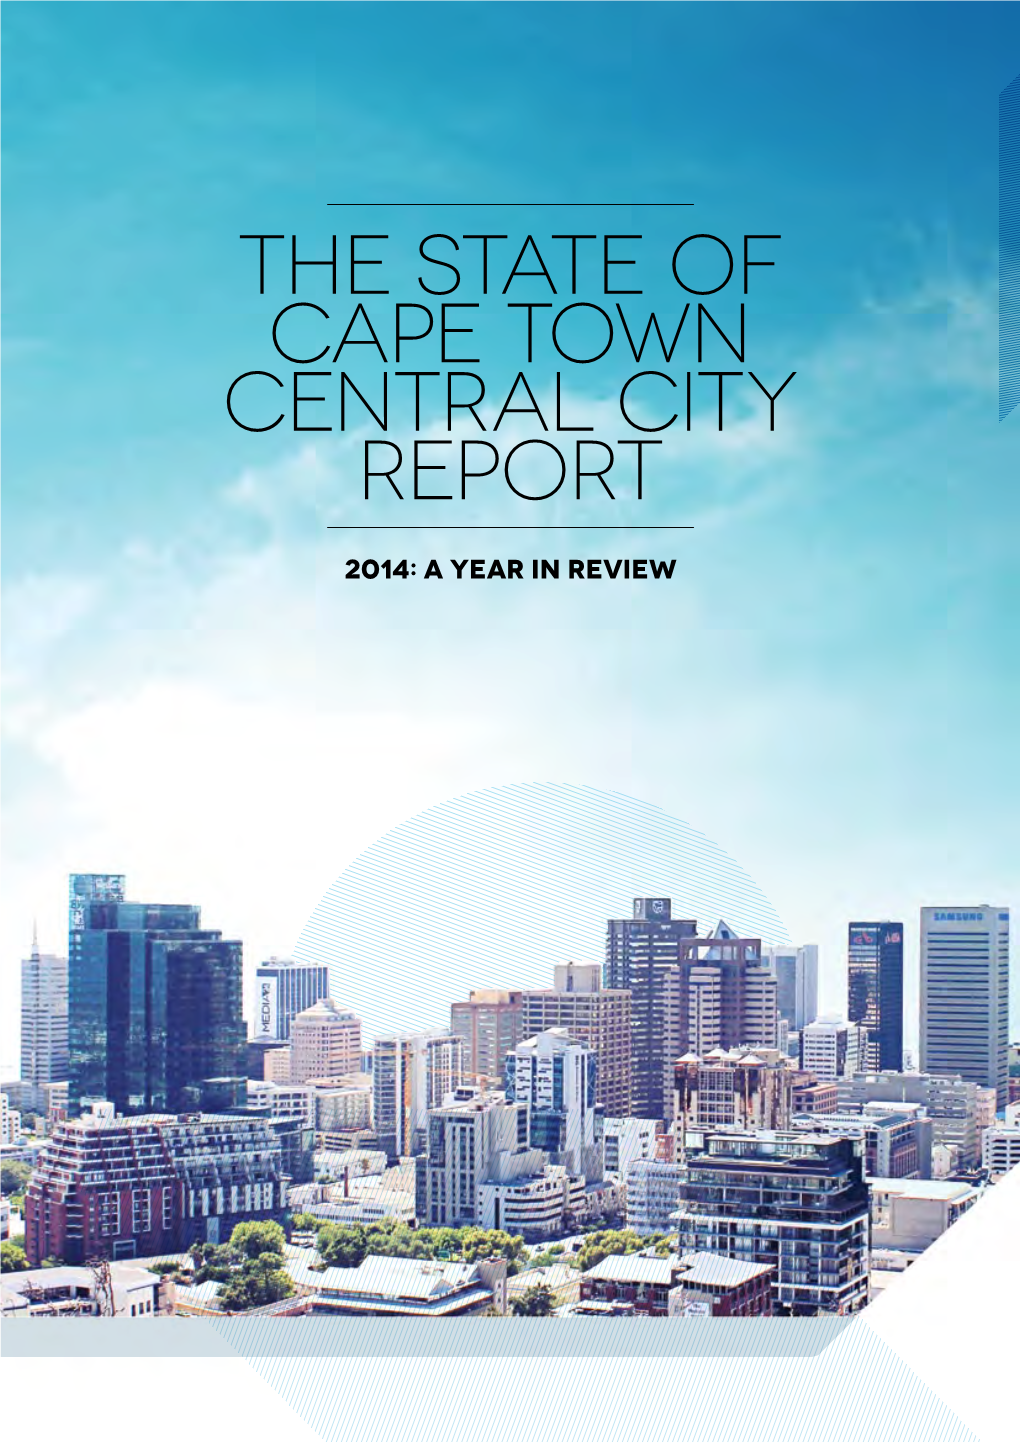 The State of Cape Town Central City Report